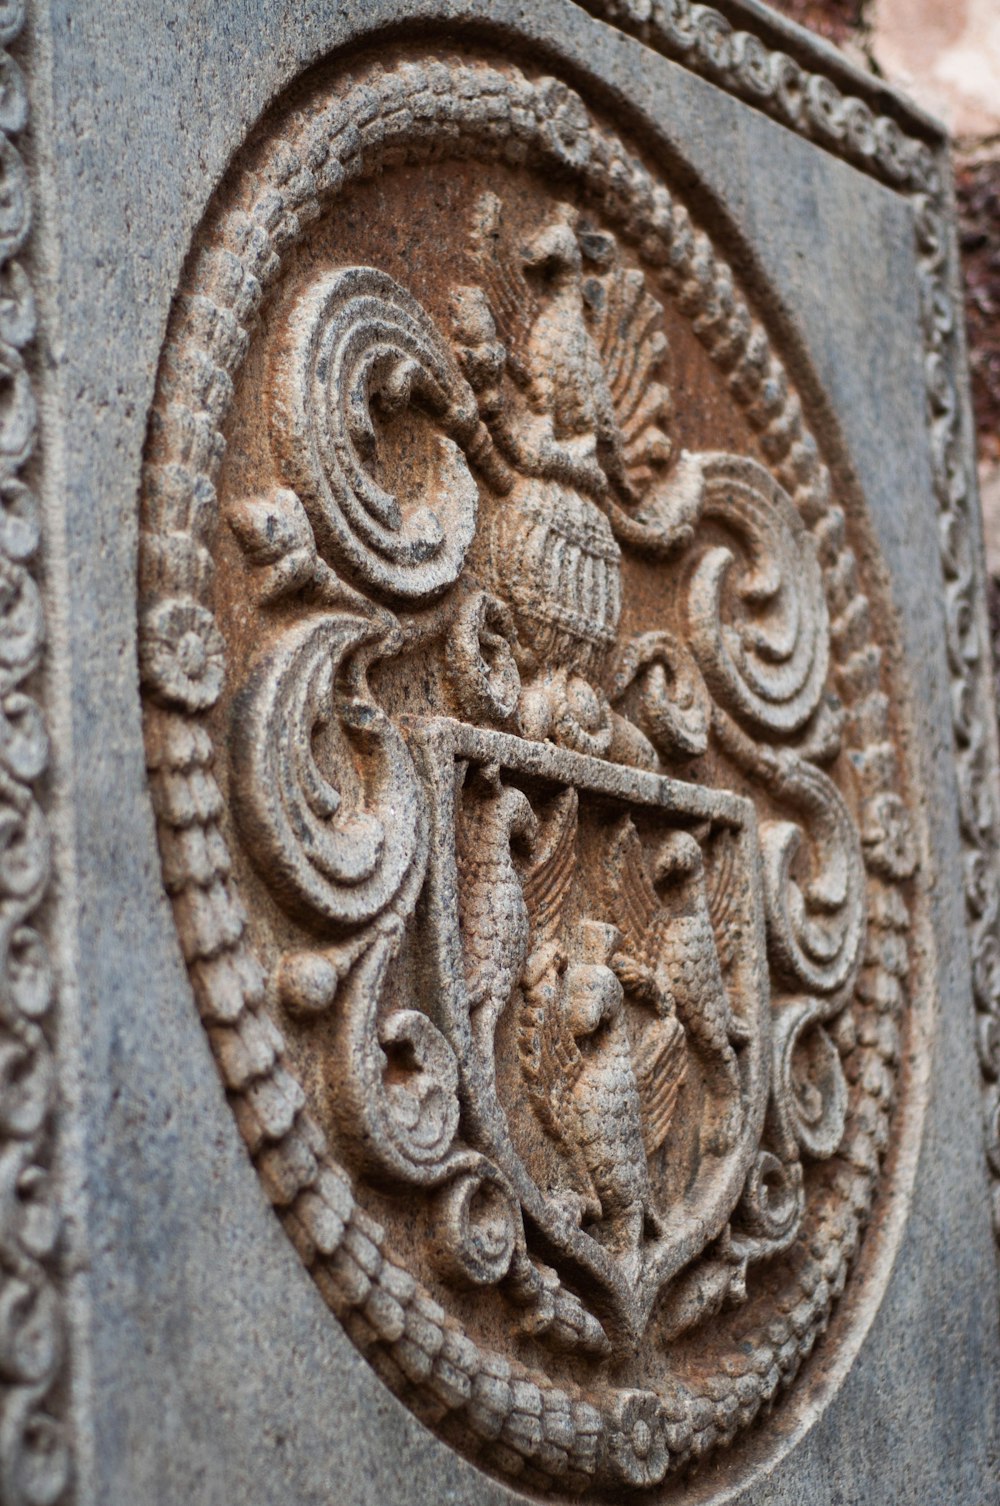 a close up of a decorative object on a wall